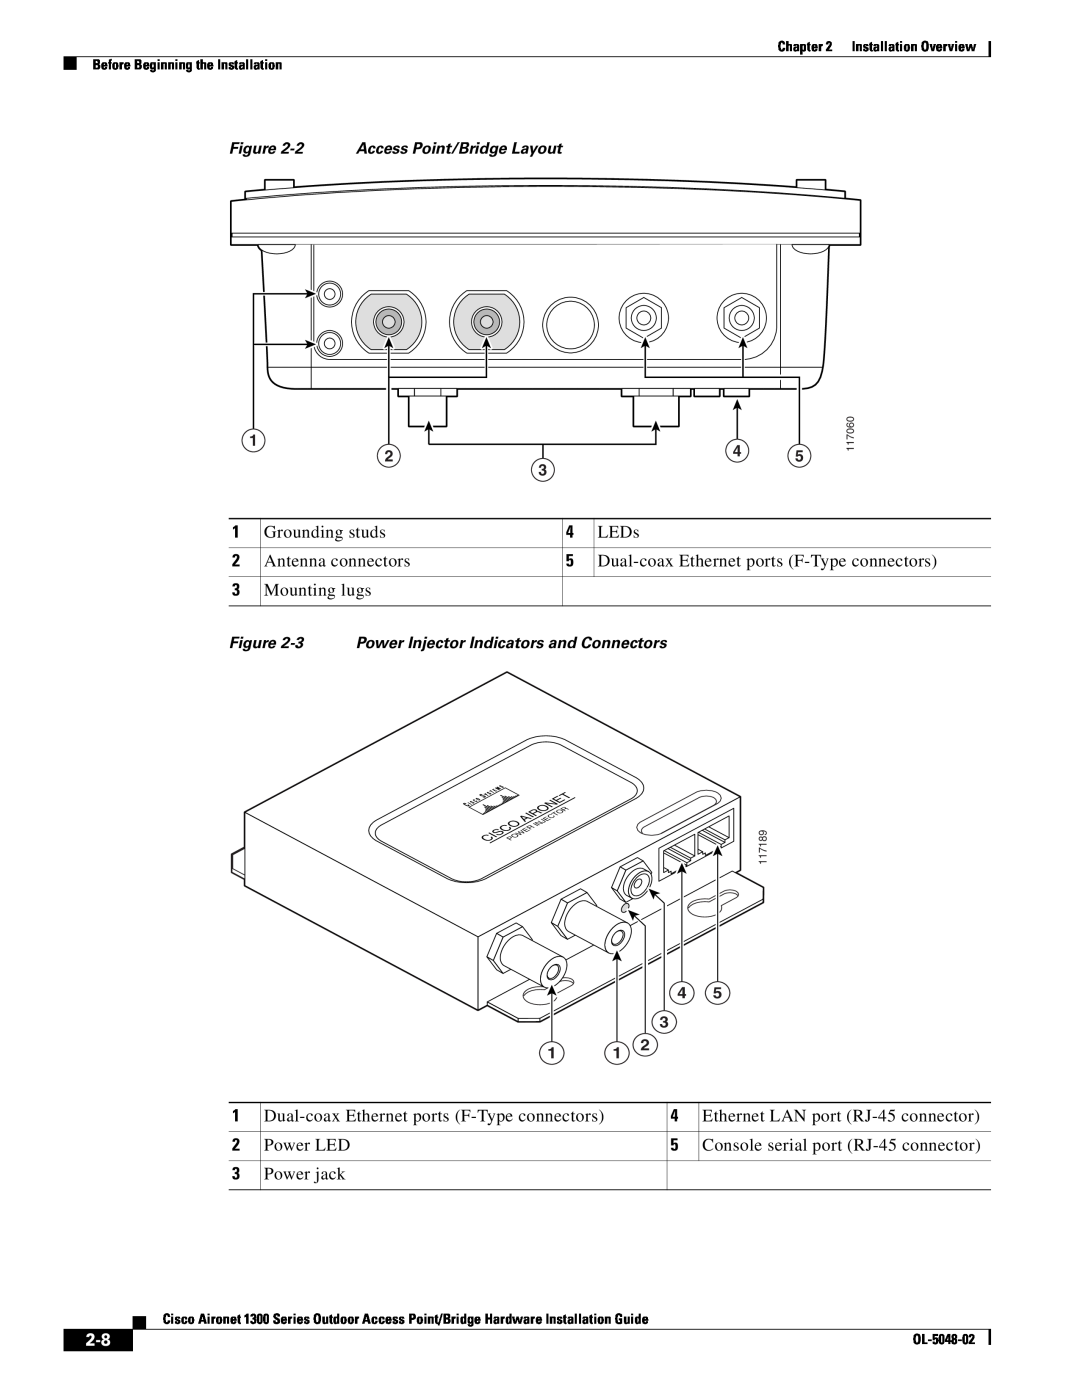 Cisco Systems 1300 Series manual 2 Access Point/Bridge Layout, Power Injector Indicators and Connectors, Ciscopower 